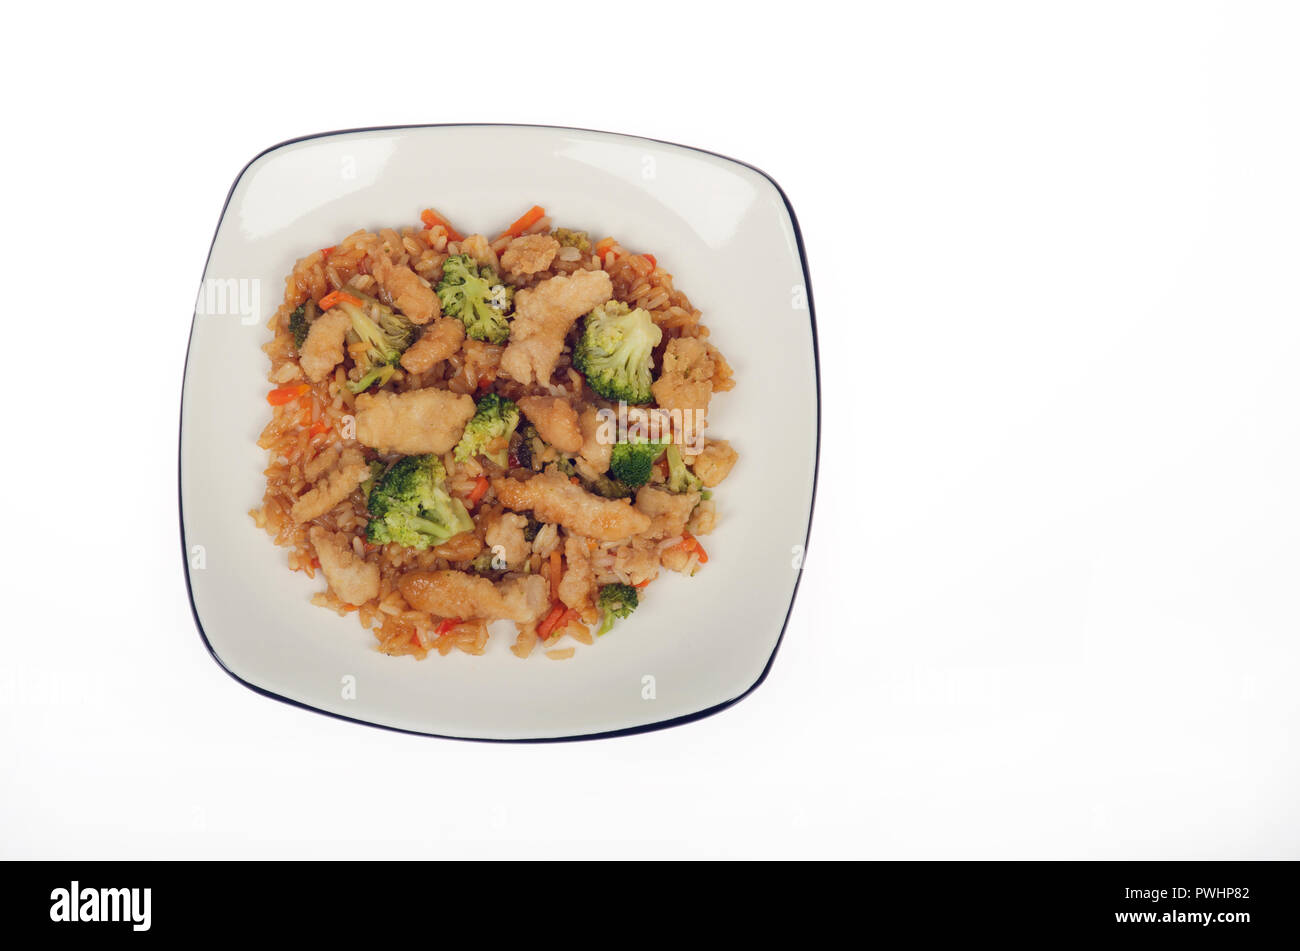 Plate of asian chicken pad thai with vegetables, including broccoli and rice Stock Photo